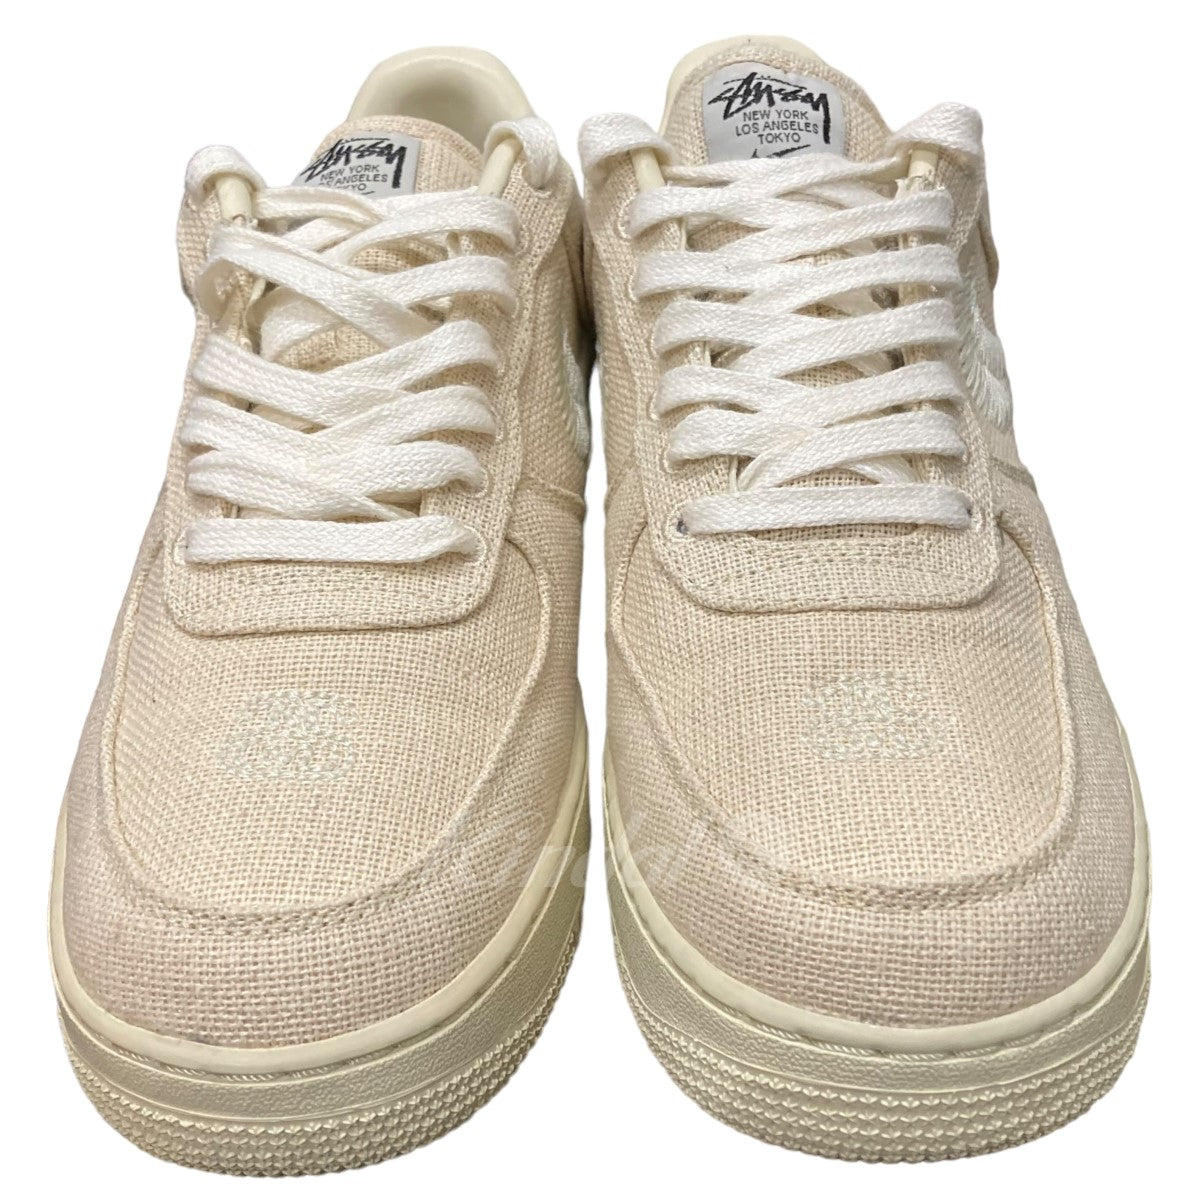 Stussy×NIKE 「Air Force 1 Low Fossil Stone」エアフォーススニーカー ...